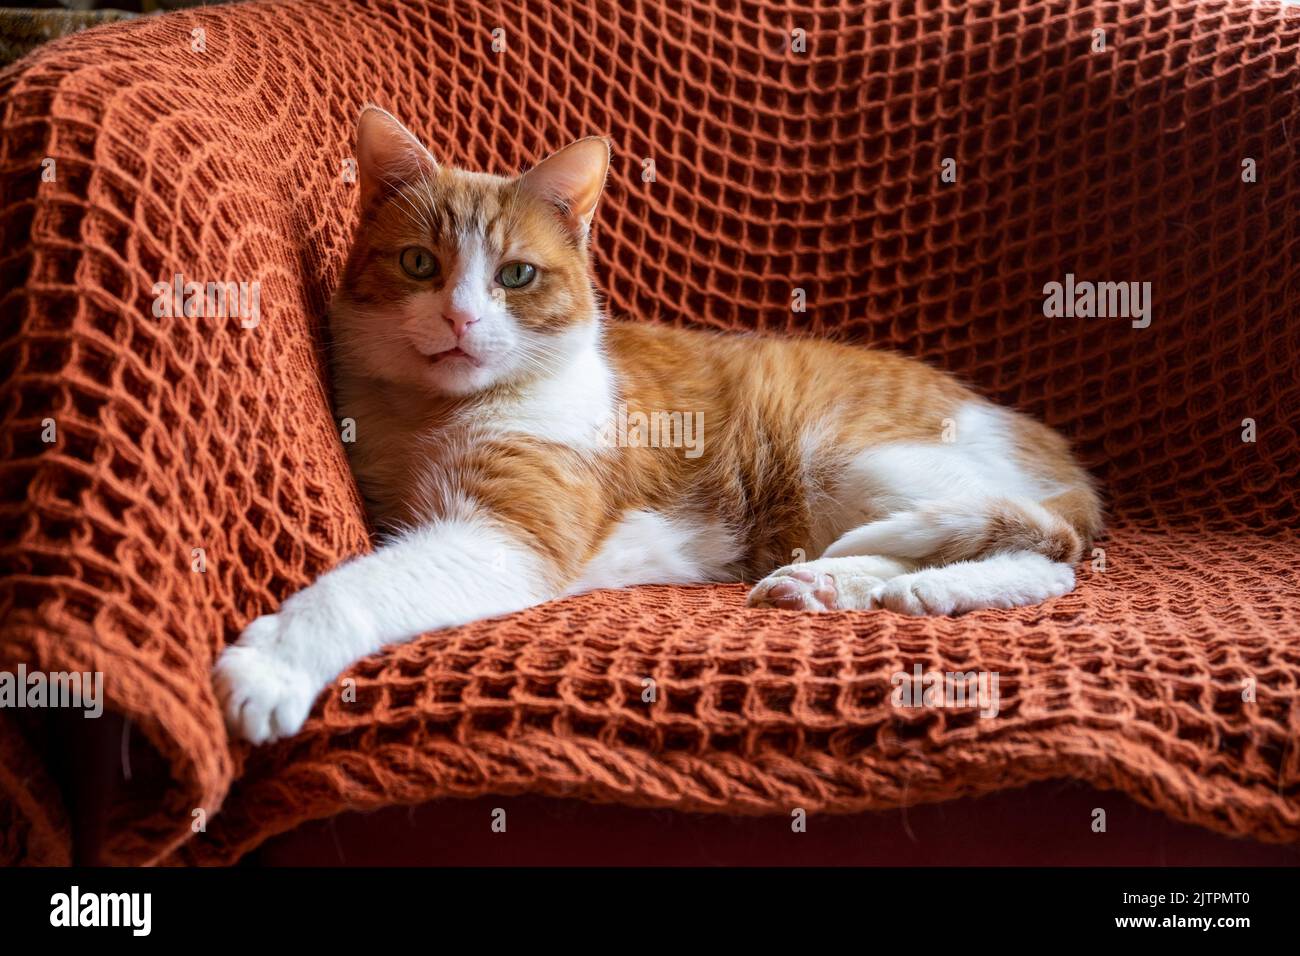 Adopted ginger and white tom cat with green eyes sitting on orange rug on chair Stock Photo